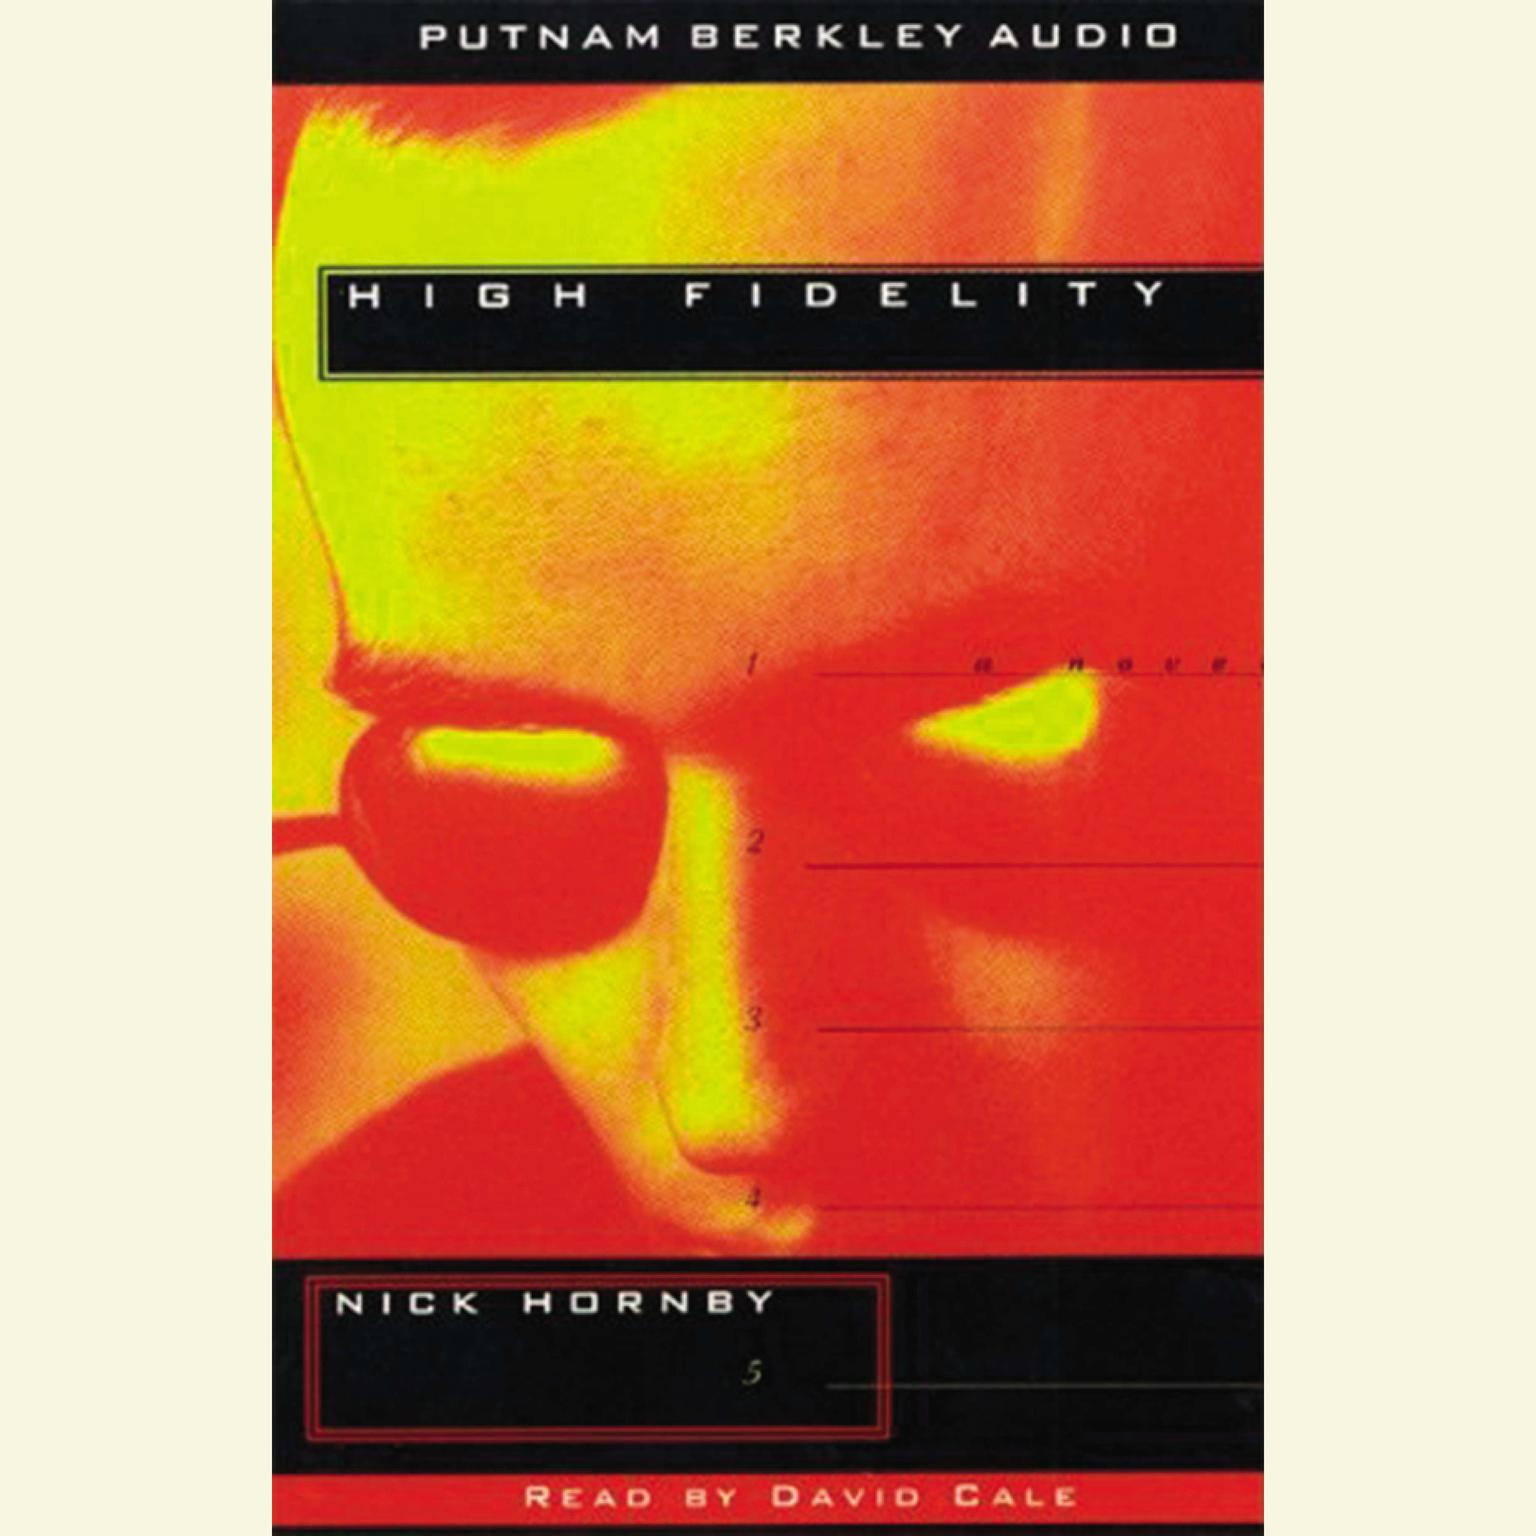 High Fidelity (Abridged) Audiobook, by Nick Hornby